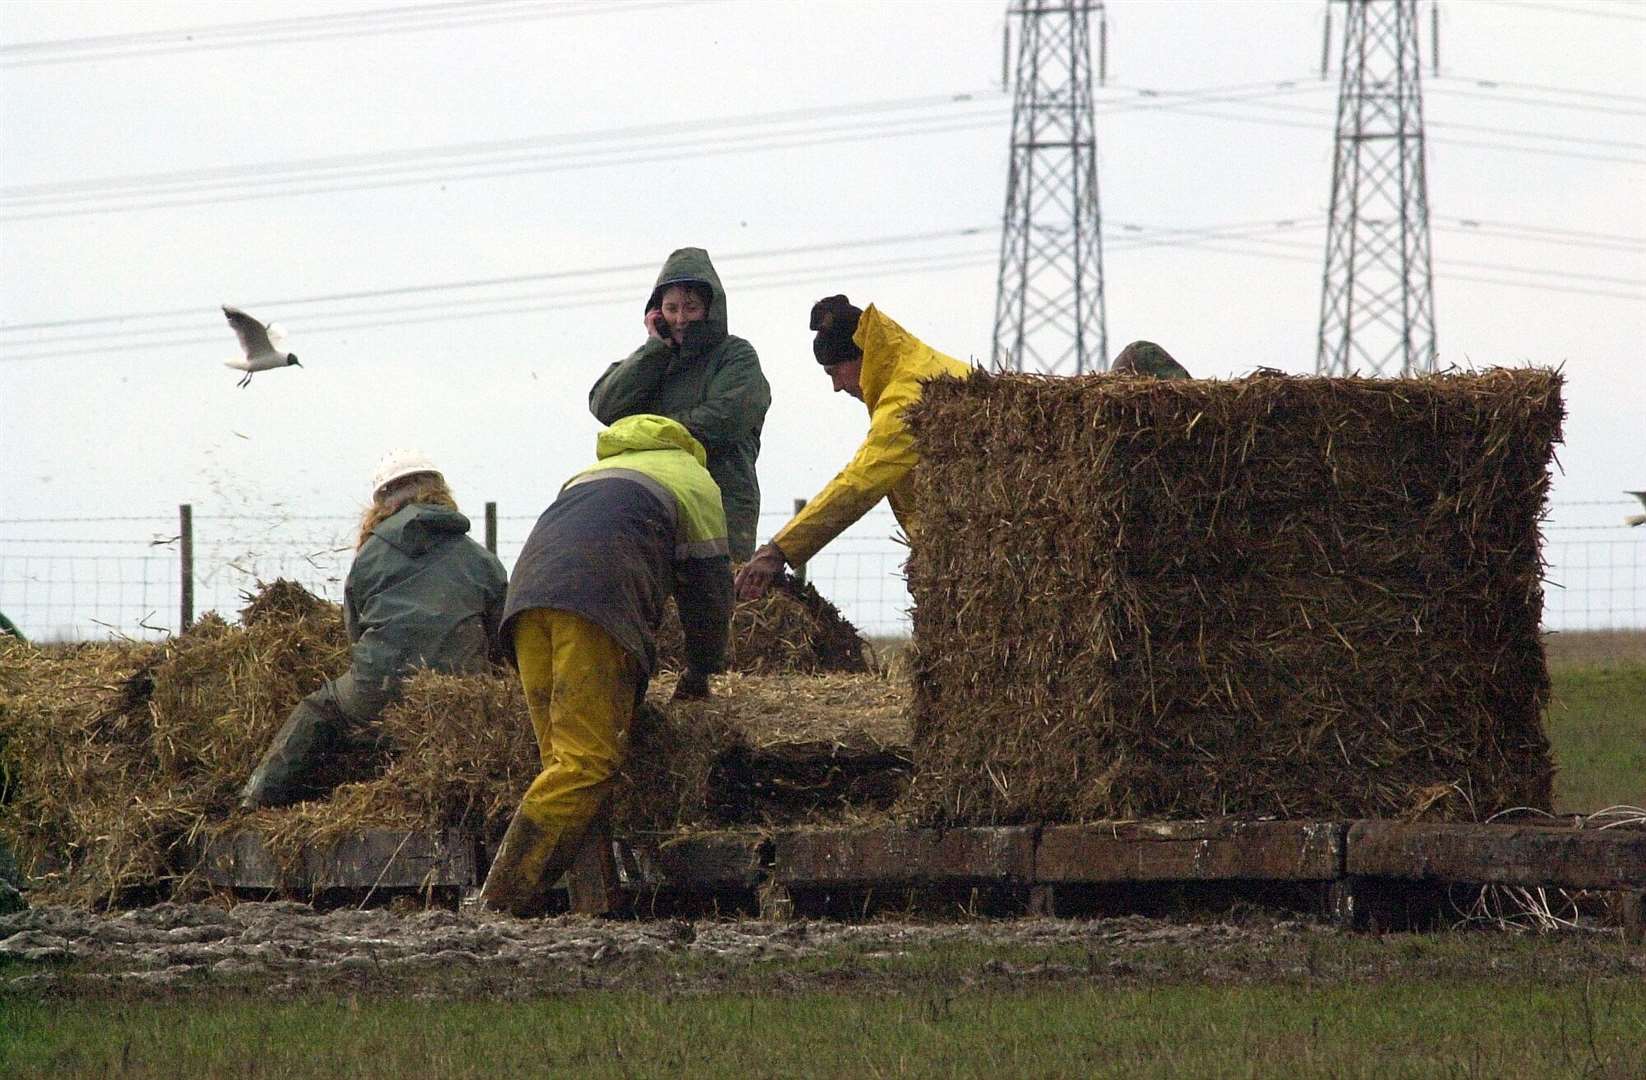 Building a fire in Sheppey to burn livestock, Sheppey, March 18, 2001.